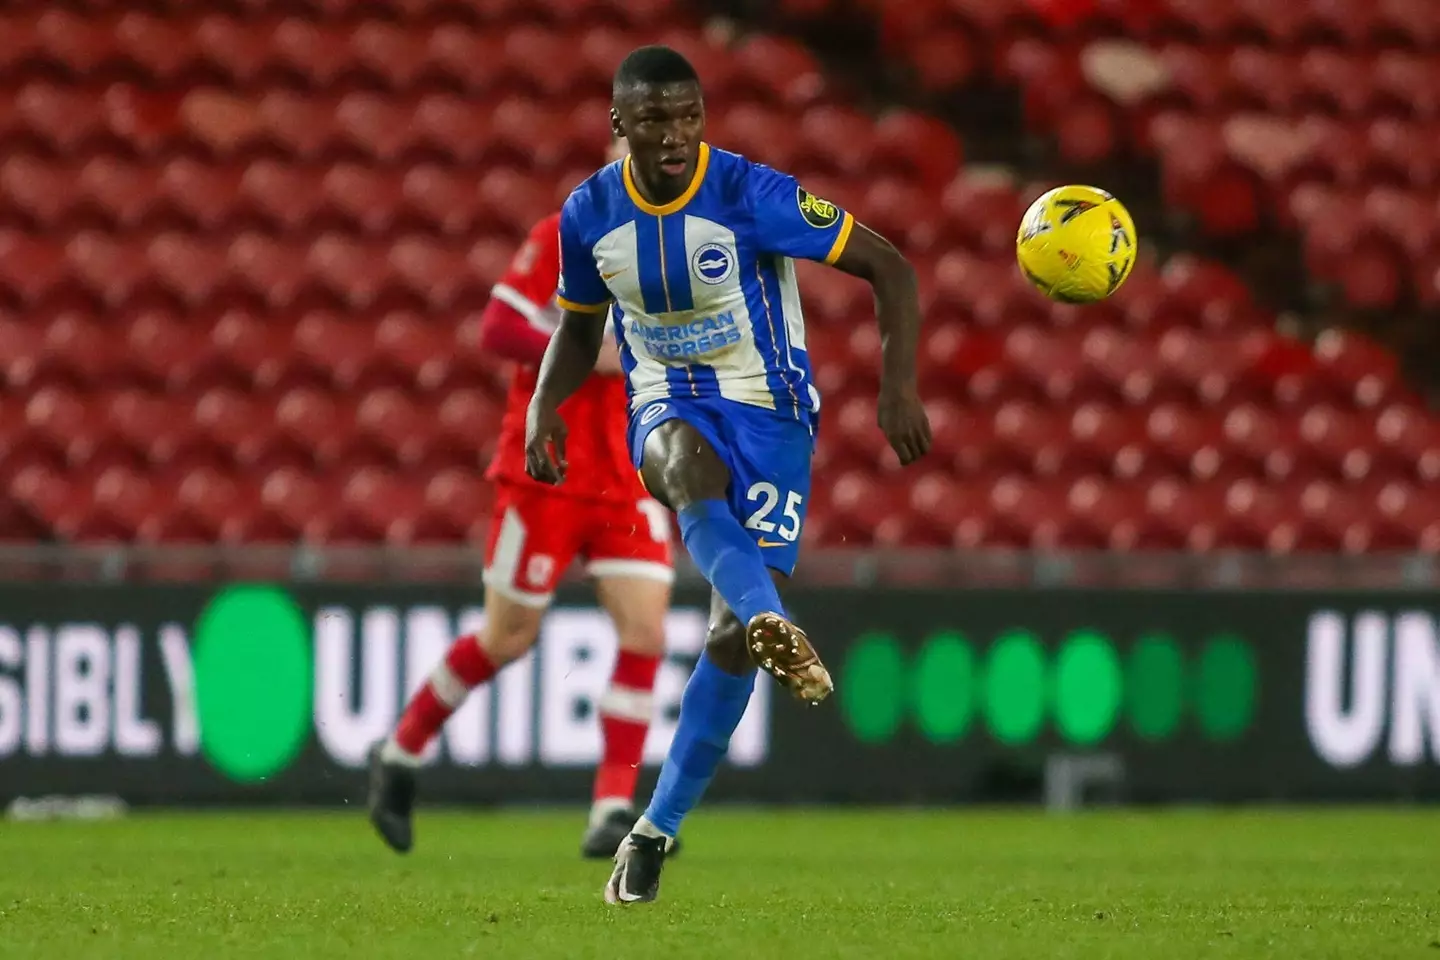 Caicedo has confirmed he wishes to leave Brighton. (Image